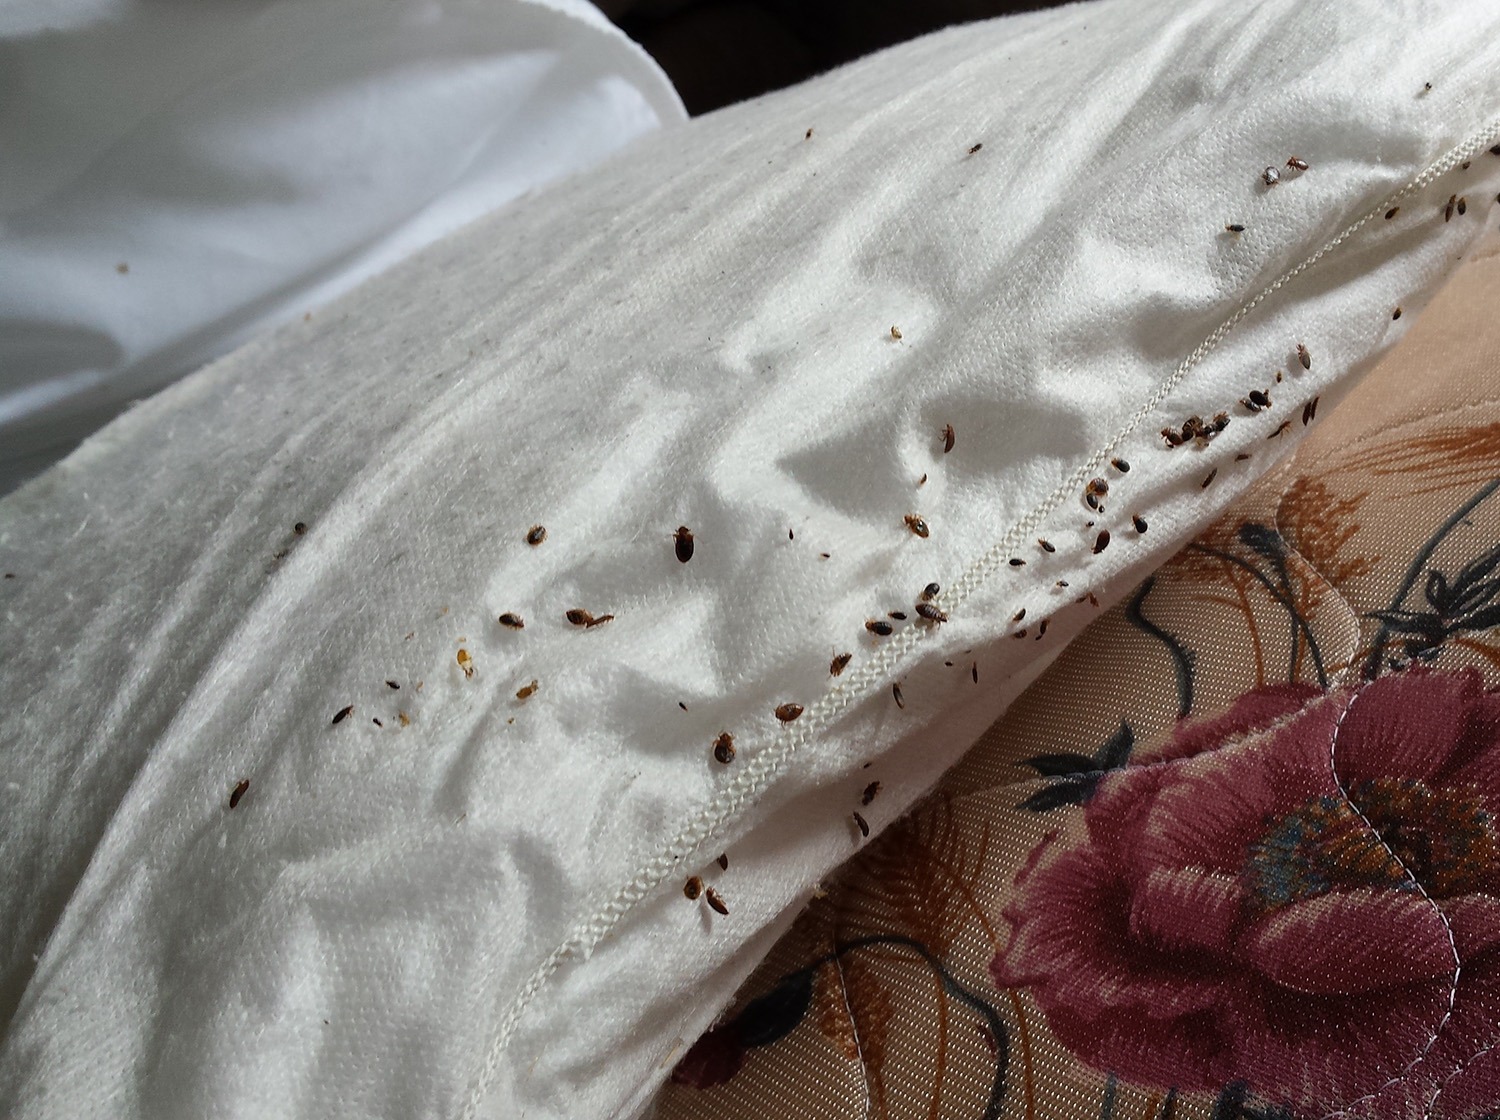 Detail Images Of Bed Bugs On A Bed Nomer 19